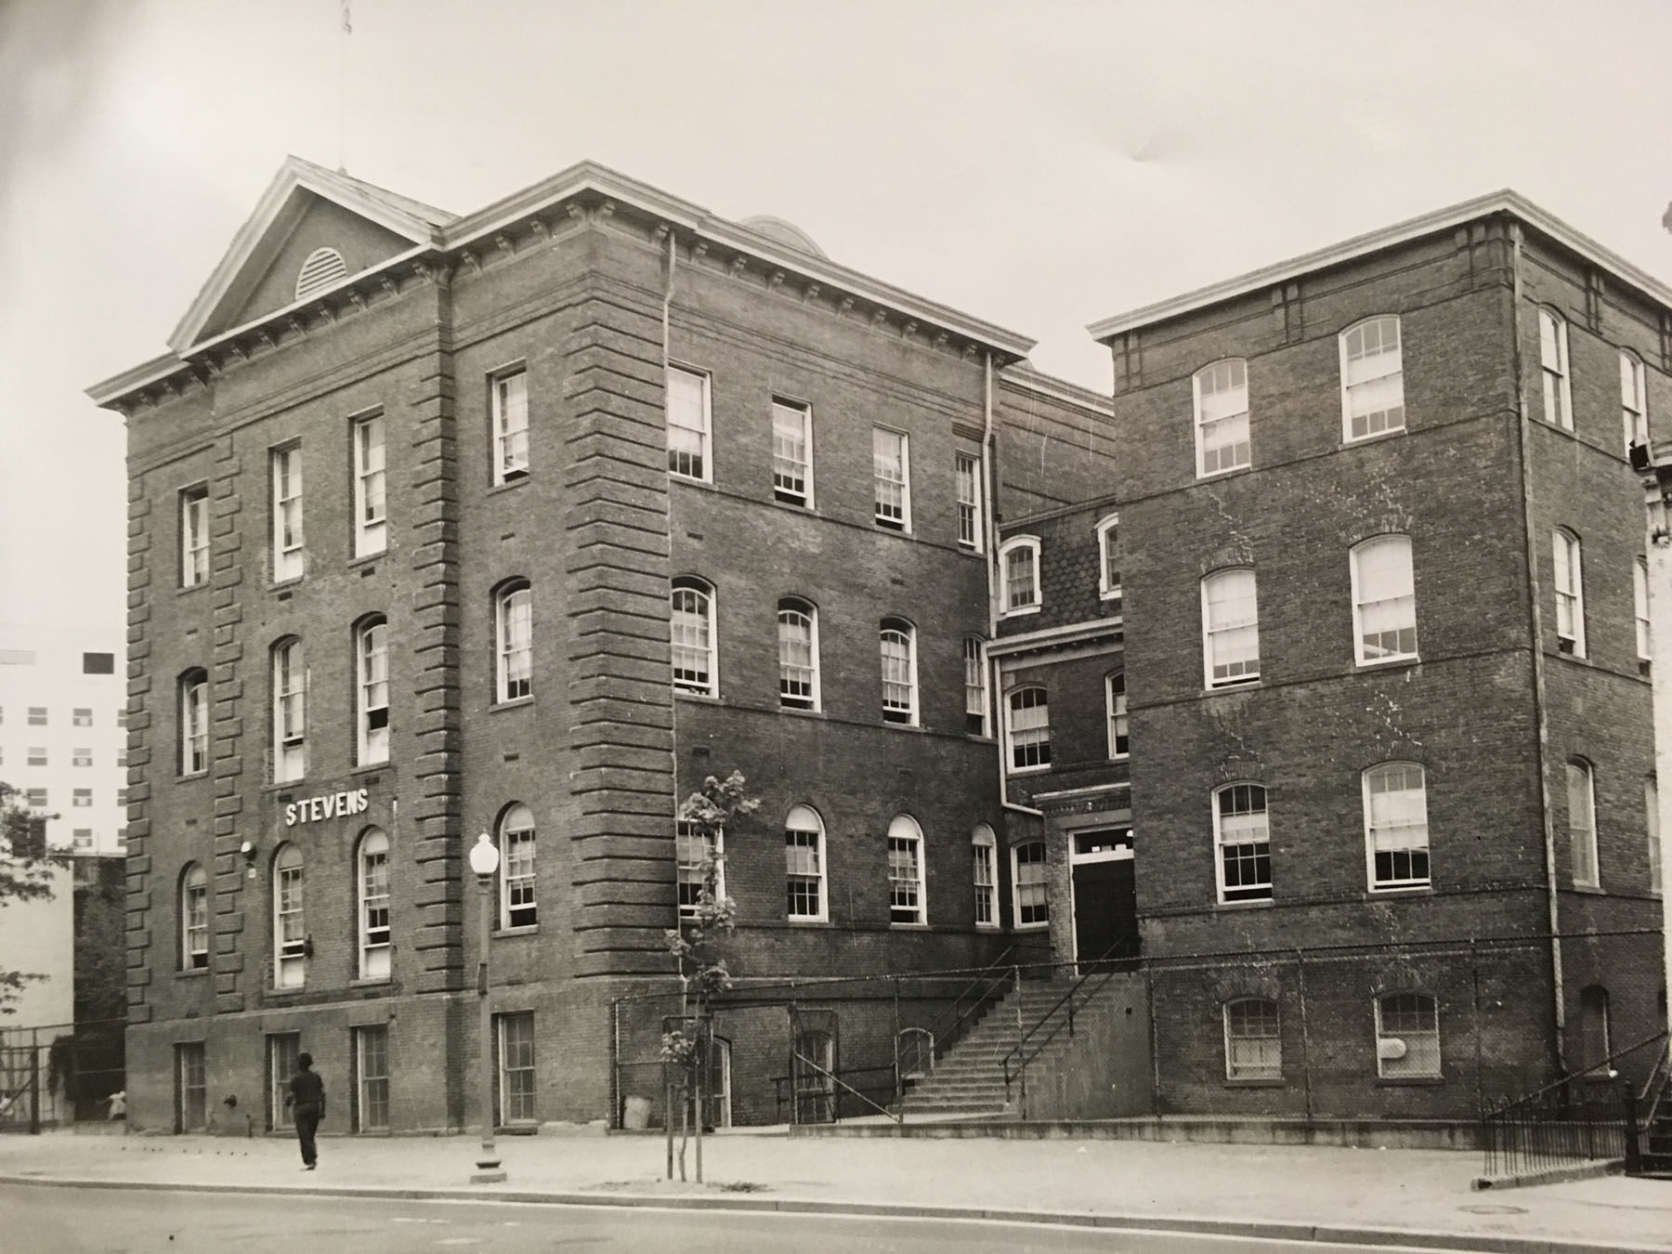 An undated photograph shows Thaddeus Stevens Elementary School. The photograph was probably in the 1950s based on other photos in the collection that depict fashions wore by the school children. The school building was originally constructed in 1868, the first public school for African-American children paid for by public funds. Until it was shuttered by then-schools chancellor Michelle Rhee's controversial reform measures in 2008, it was oldest surviving public school in D.C. still in operation The brick building was painted white in the 1970s. (Courtesy Charles Sumner School Museum and Archives)